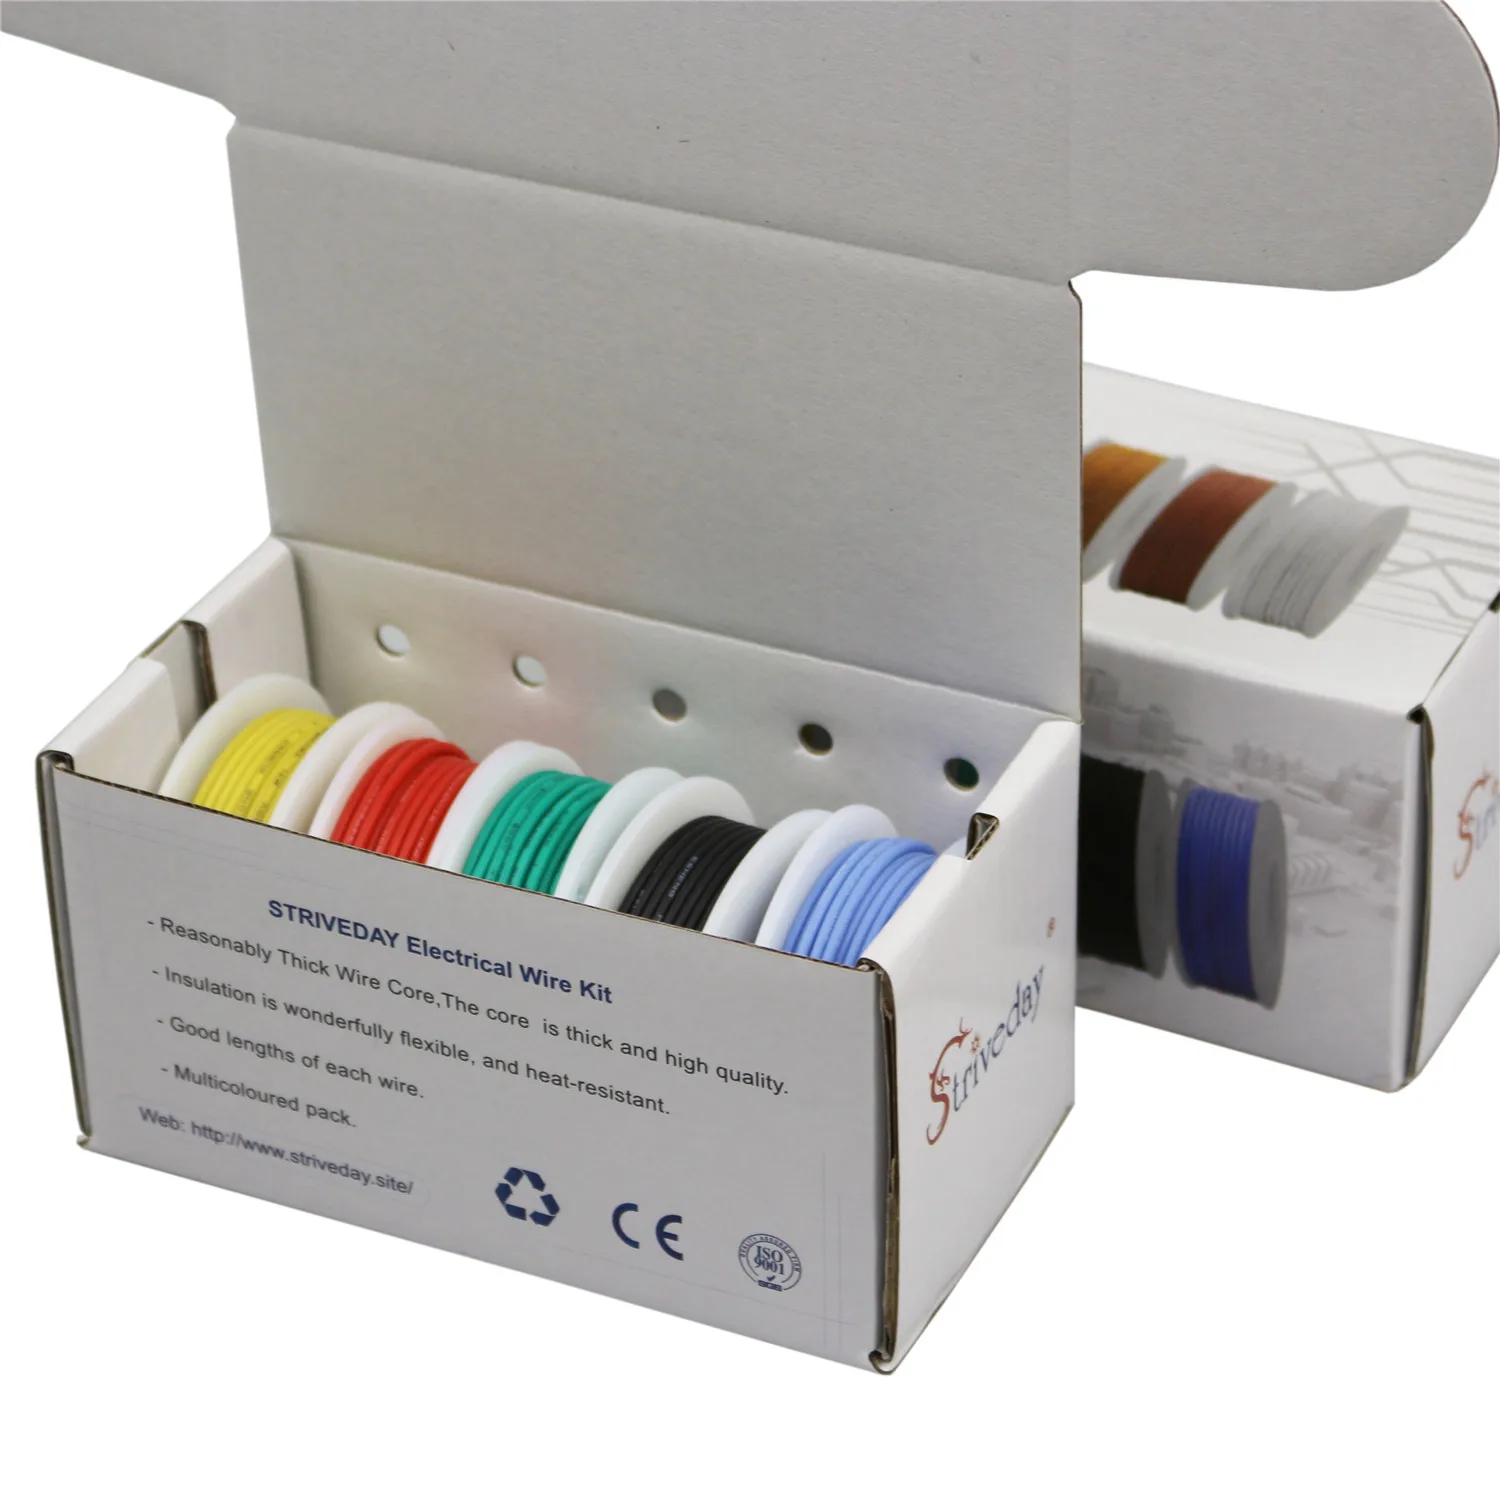 

18 20 22 24 26 28 30AWG flexible silicone cable mixing 10 color box 1 + box 2 package wire tinned copper electronic wire DIY